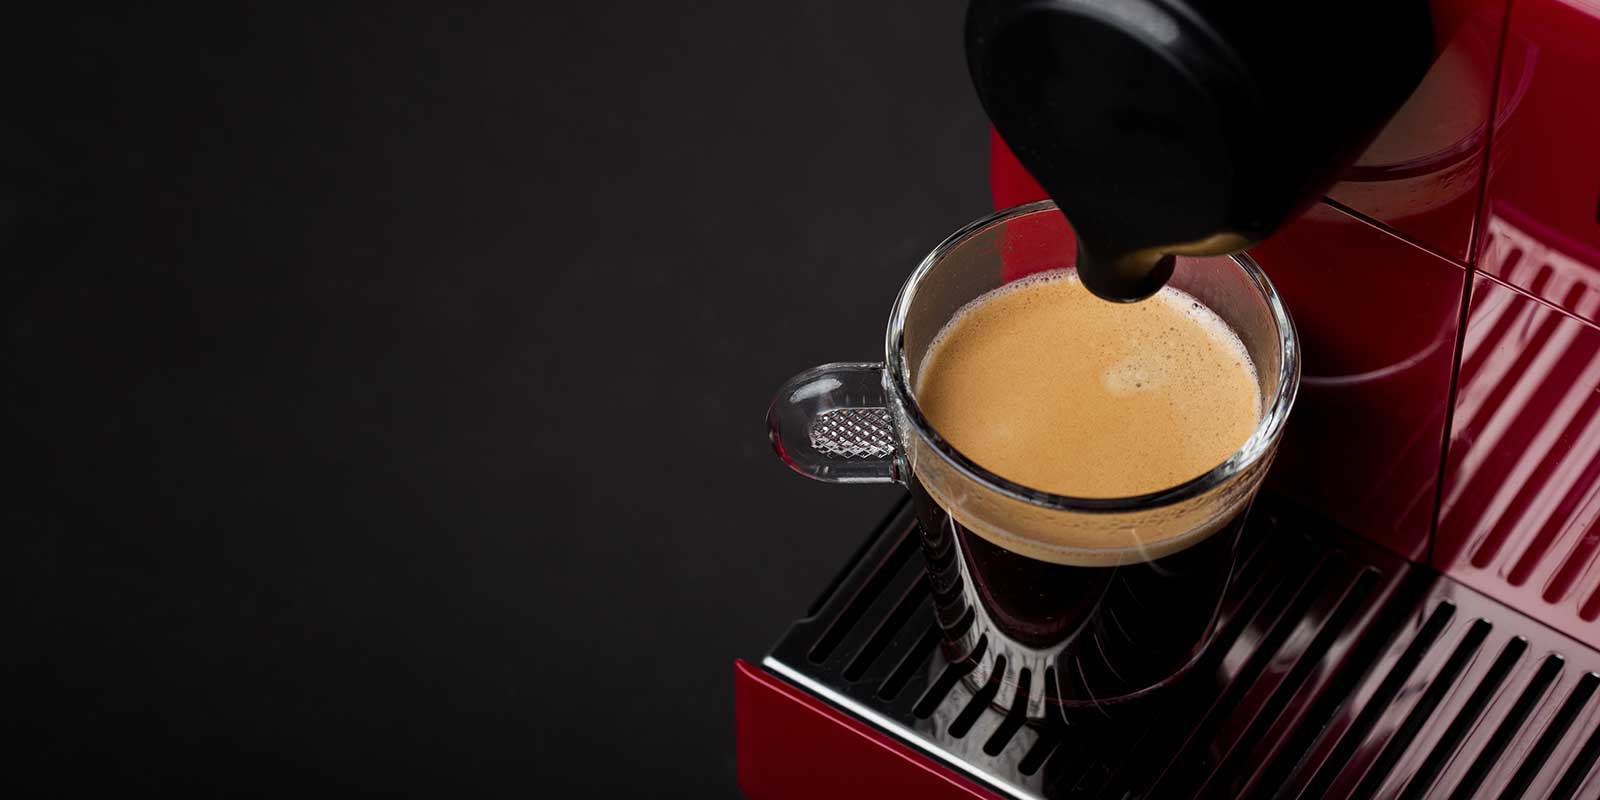 Fresh cup of coffee from a Nespresso coffee machine